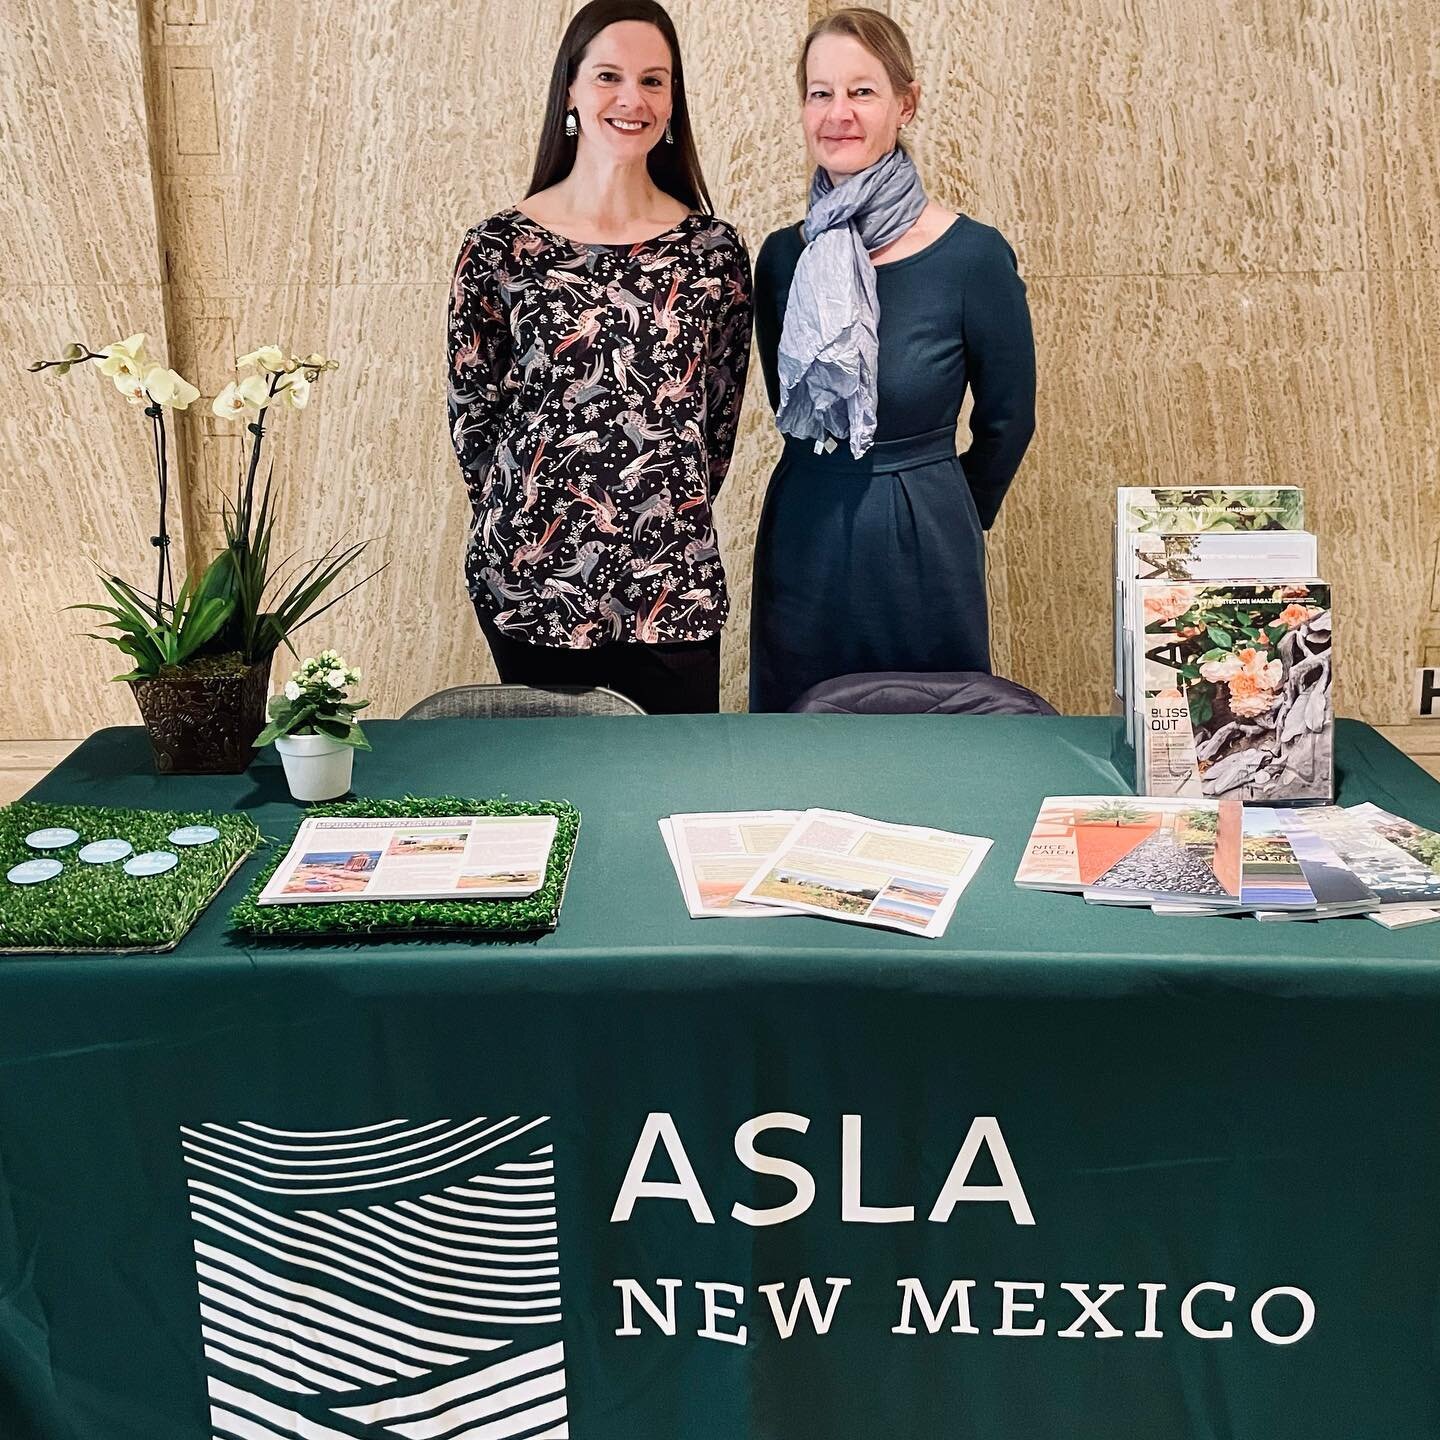 NMASLA Legislative Advocacy Day has started! Join us to support how Landscape Architects play a significant role in our communities!

@nationalasla #StateAdvocacyDay
#ASLAadvocates #nmasla #landscapearchitecture #thisislandscapearchitecture